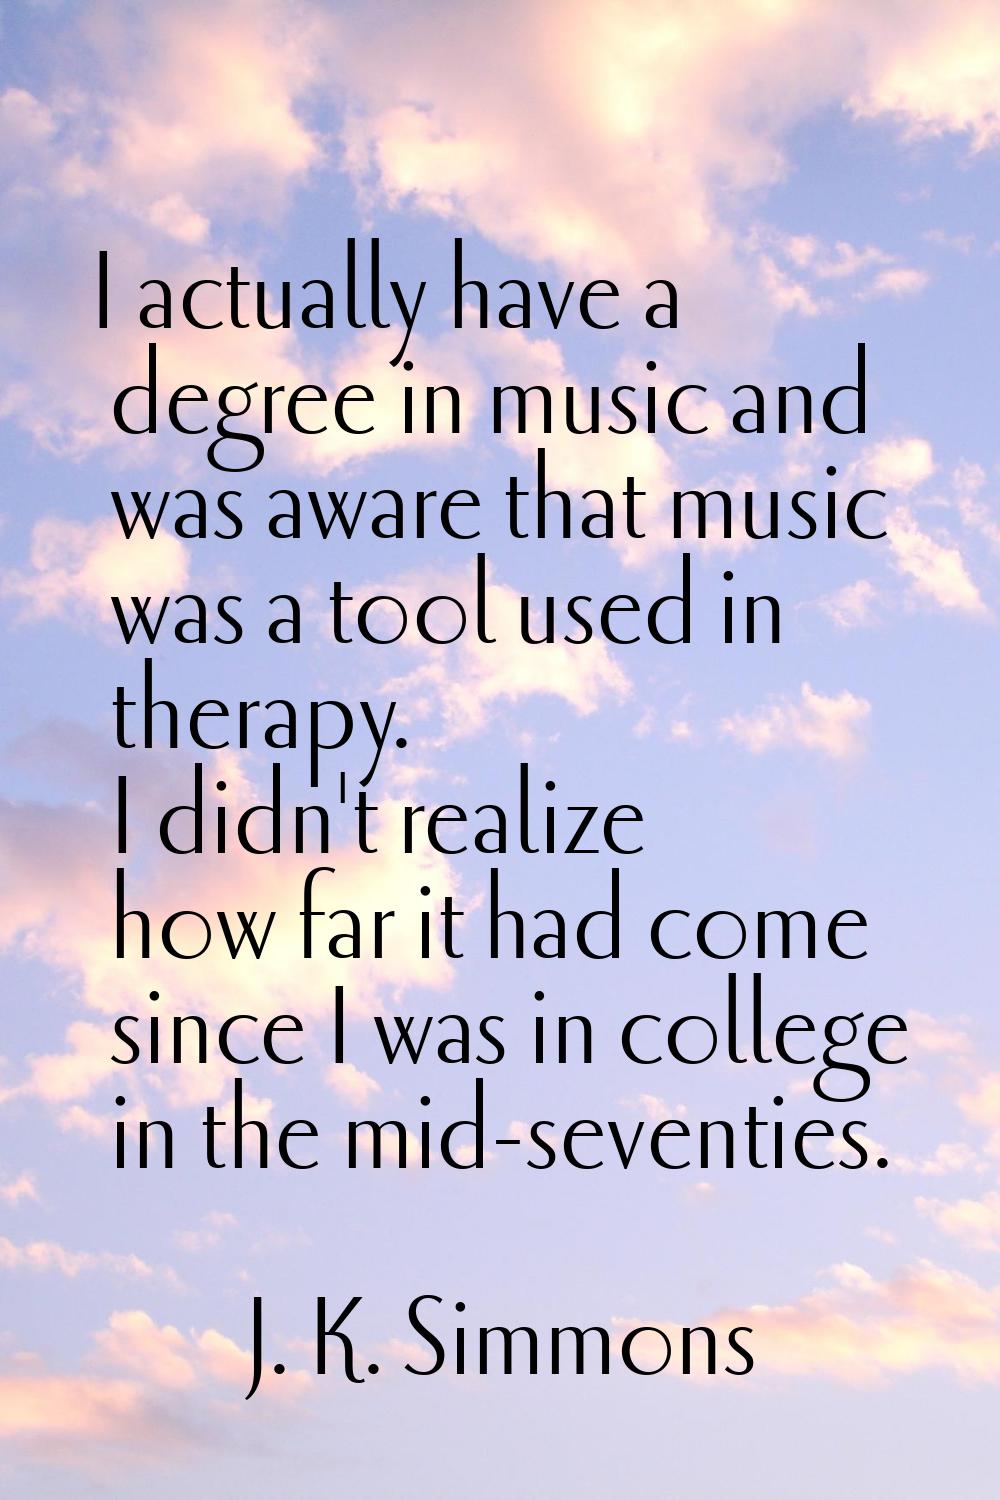 I actually have a degree in music and was aware that music was a tool used in therapy. I didn't rea